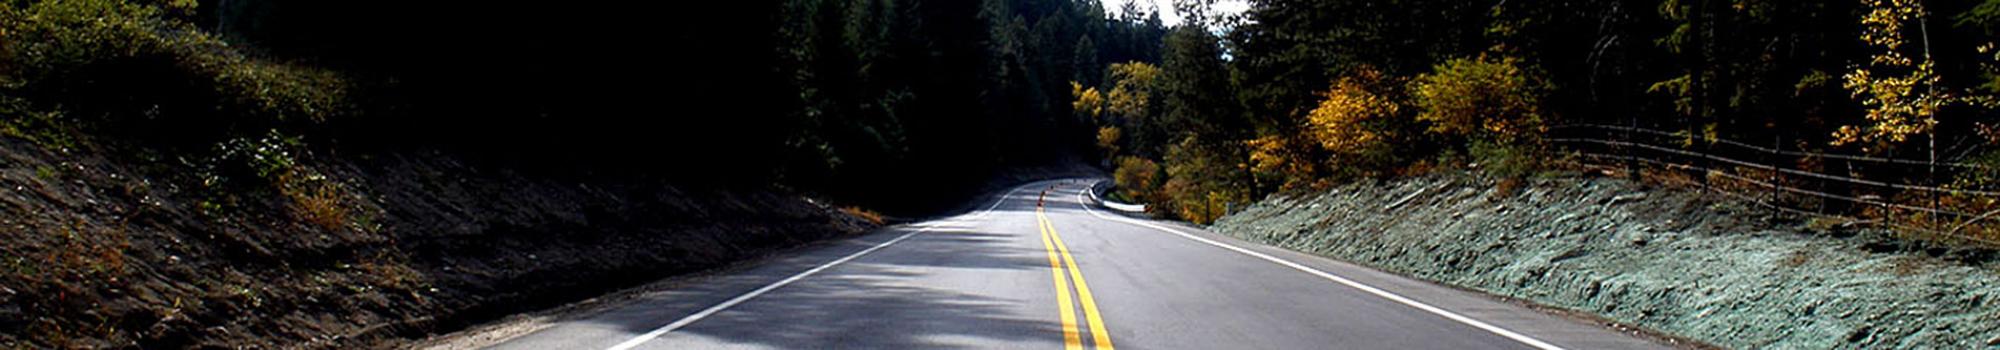 Stevens County highway project